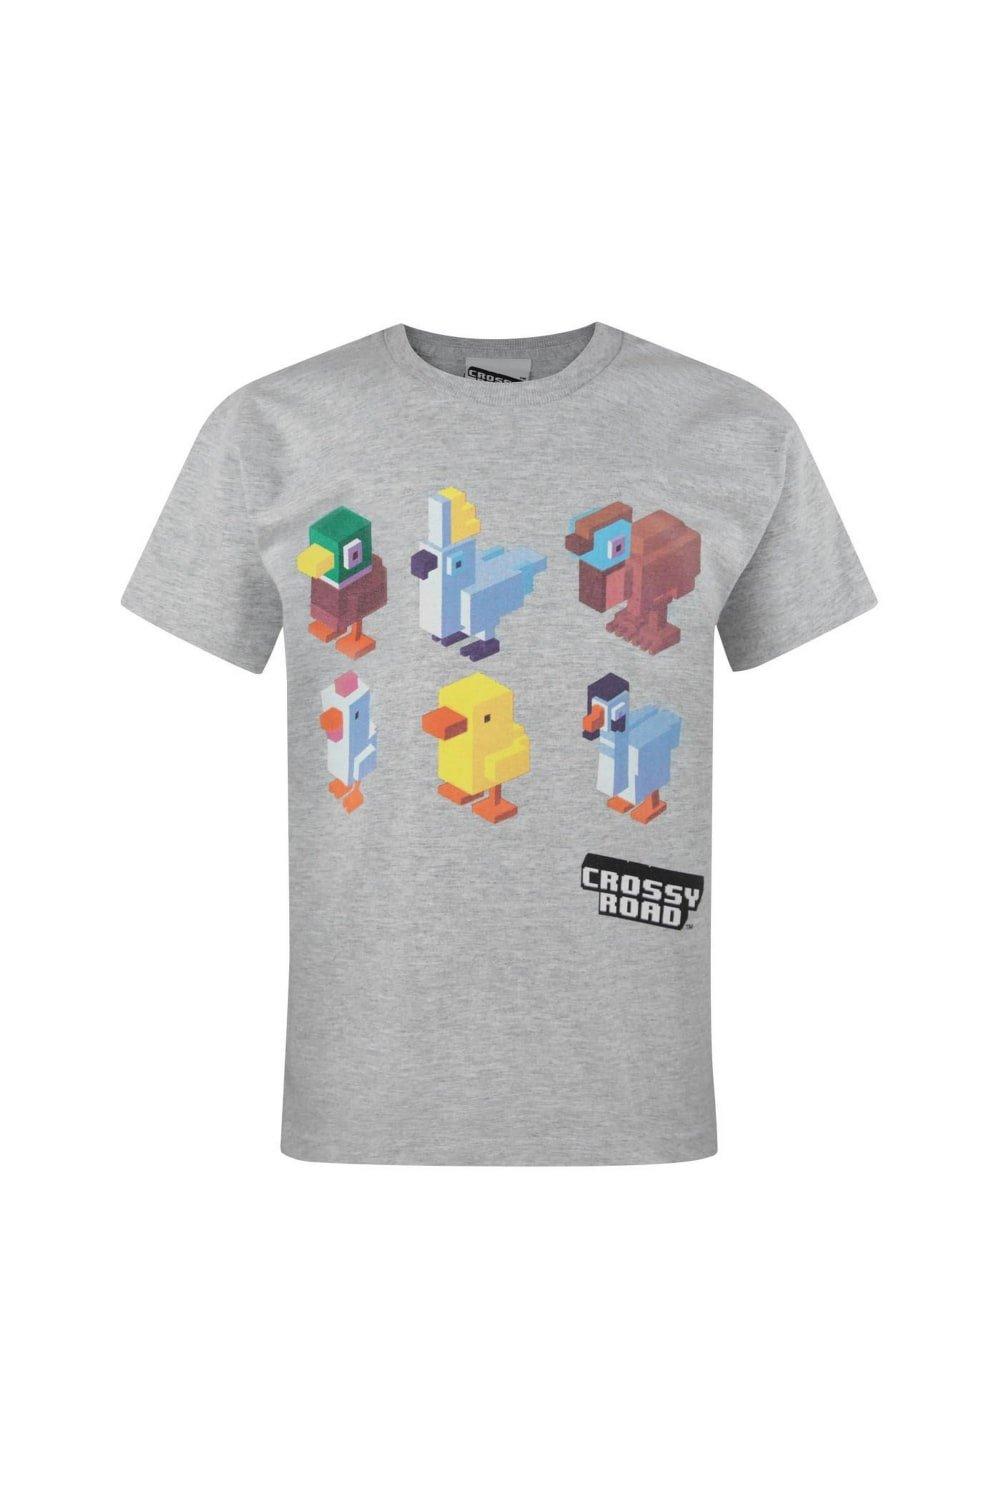 Crossy Road Official Character Design Short Sleeved T-Shirt